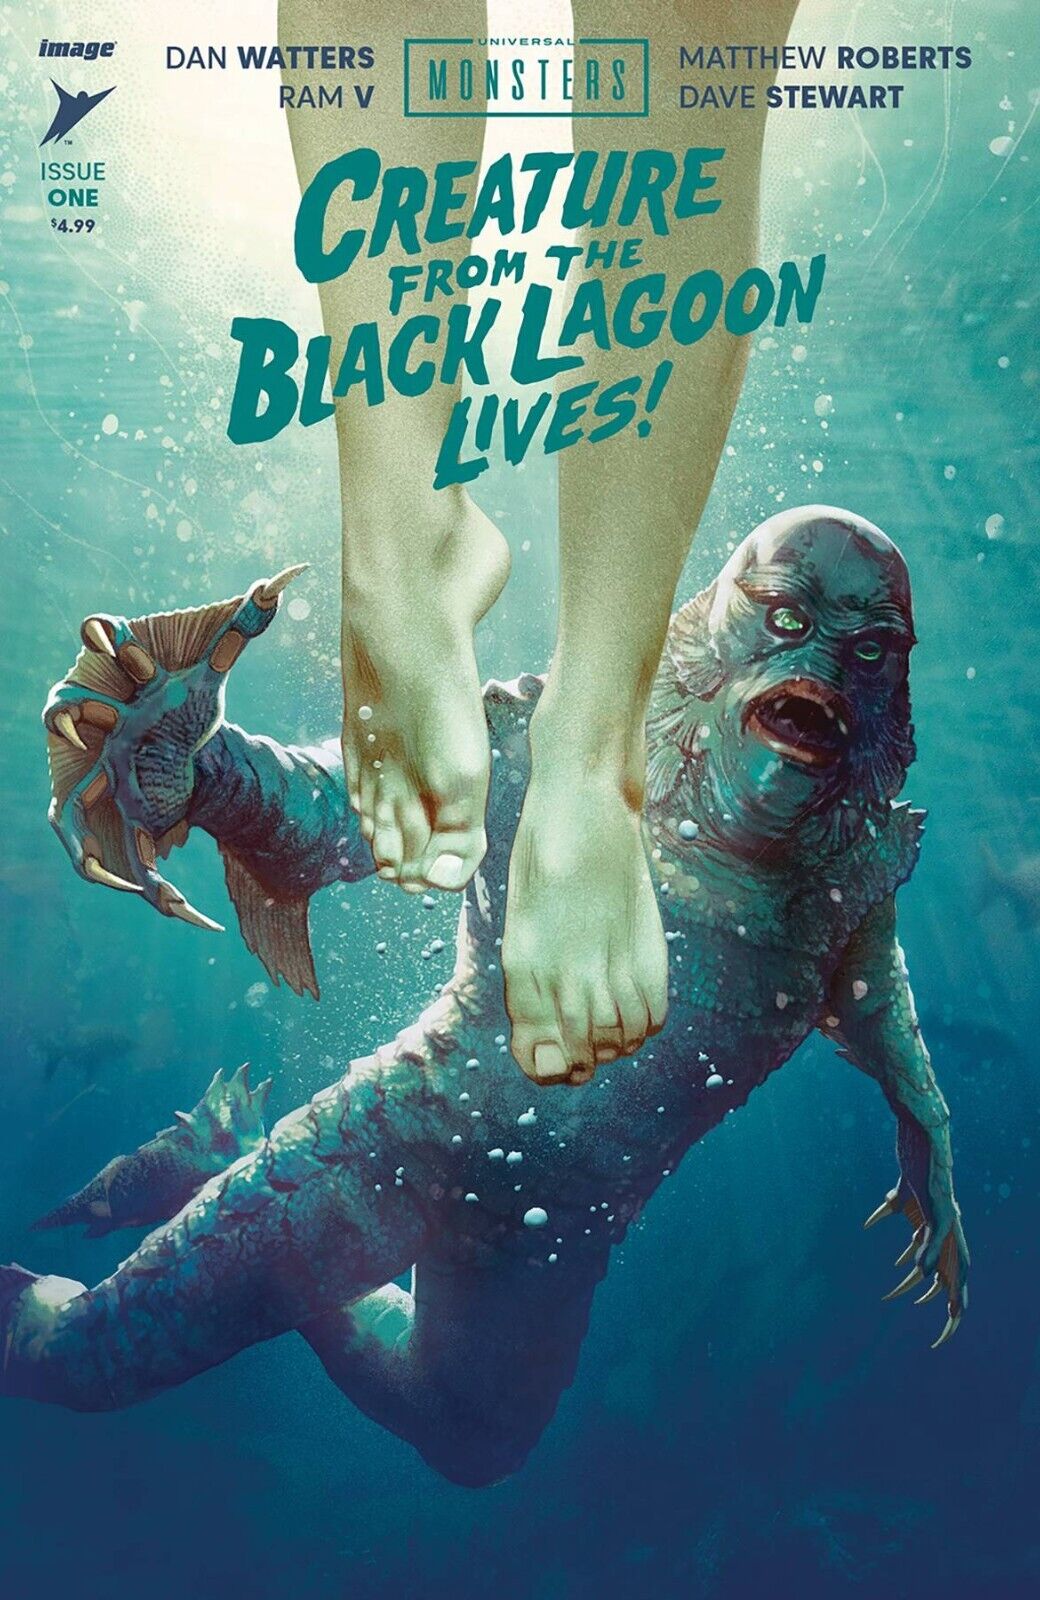 Creature from the Black Lagoon Lives #1  (Image Comics, 2024) - B Cover